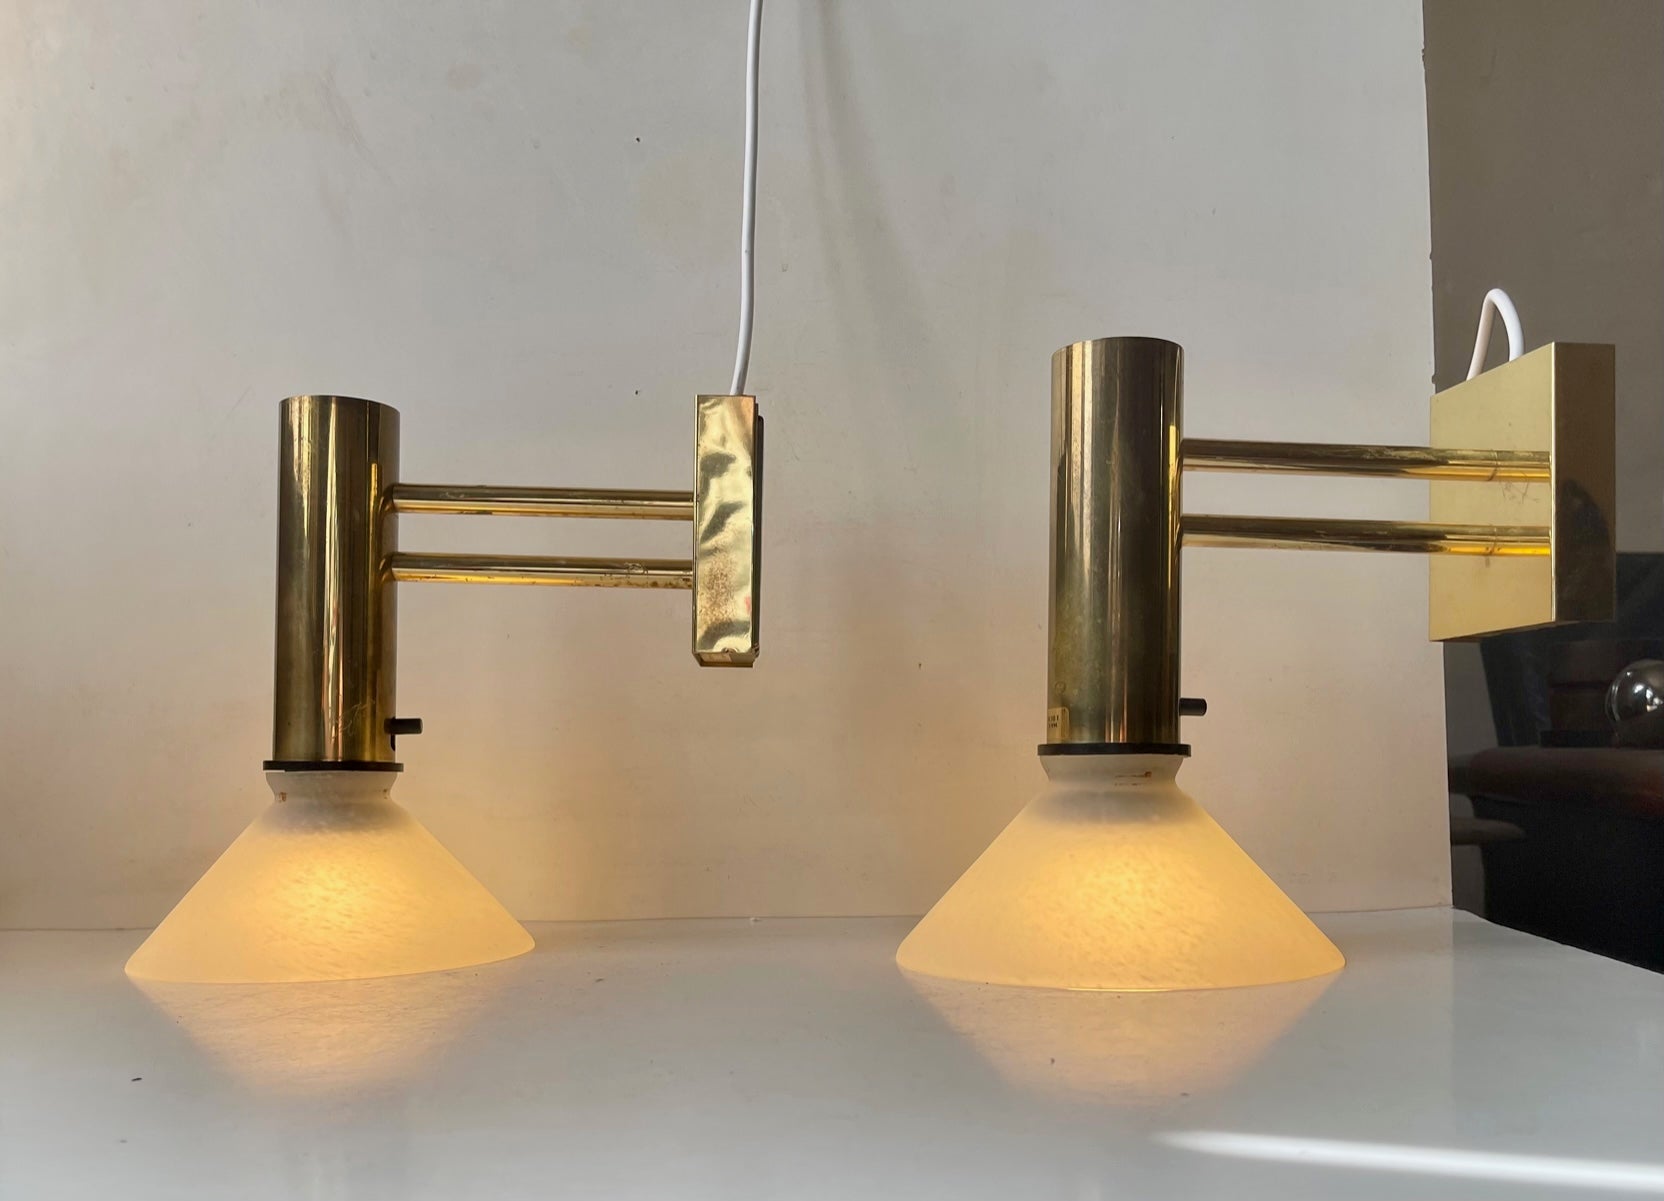 A Pair of 1970s Nautical - Navy sconces composed of brass and mounted with white textured glass shades.

For the US. The set comes installed with 110 watt adaptor plugs ready for use.